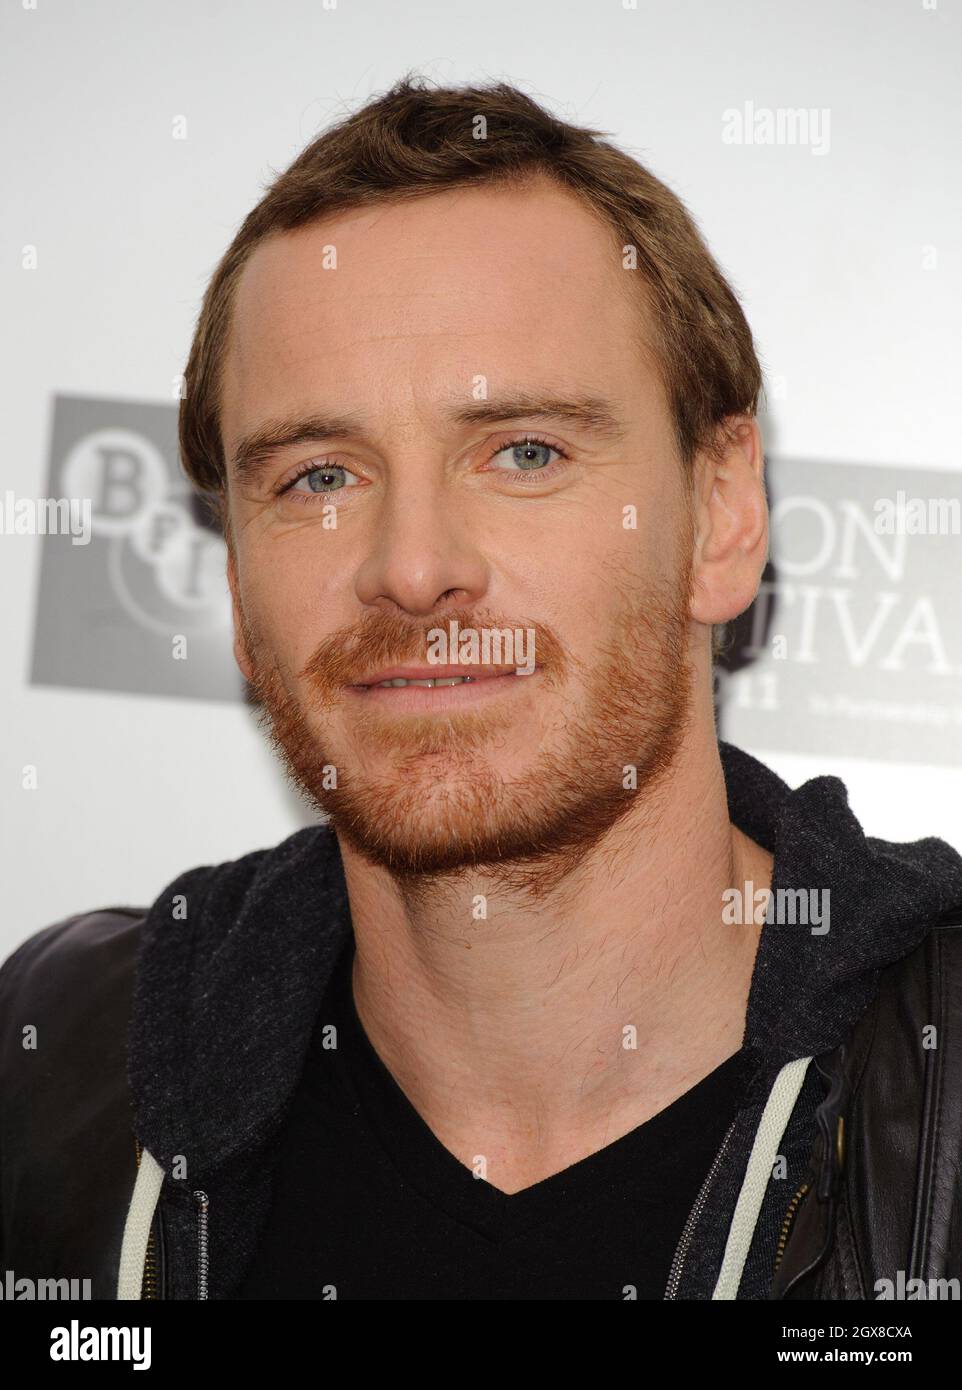 Michael Fassbender attending a photocall for A Dangerous Method, at the Vue cinema in Leicester Square, as part of the BFI London Film Festival. Stock Photo